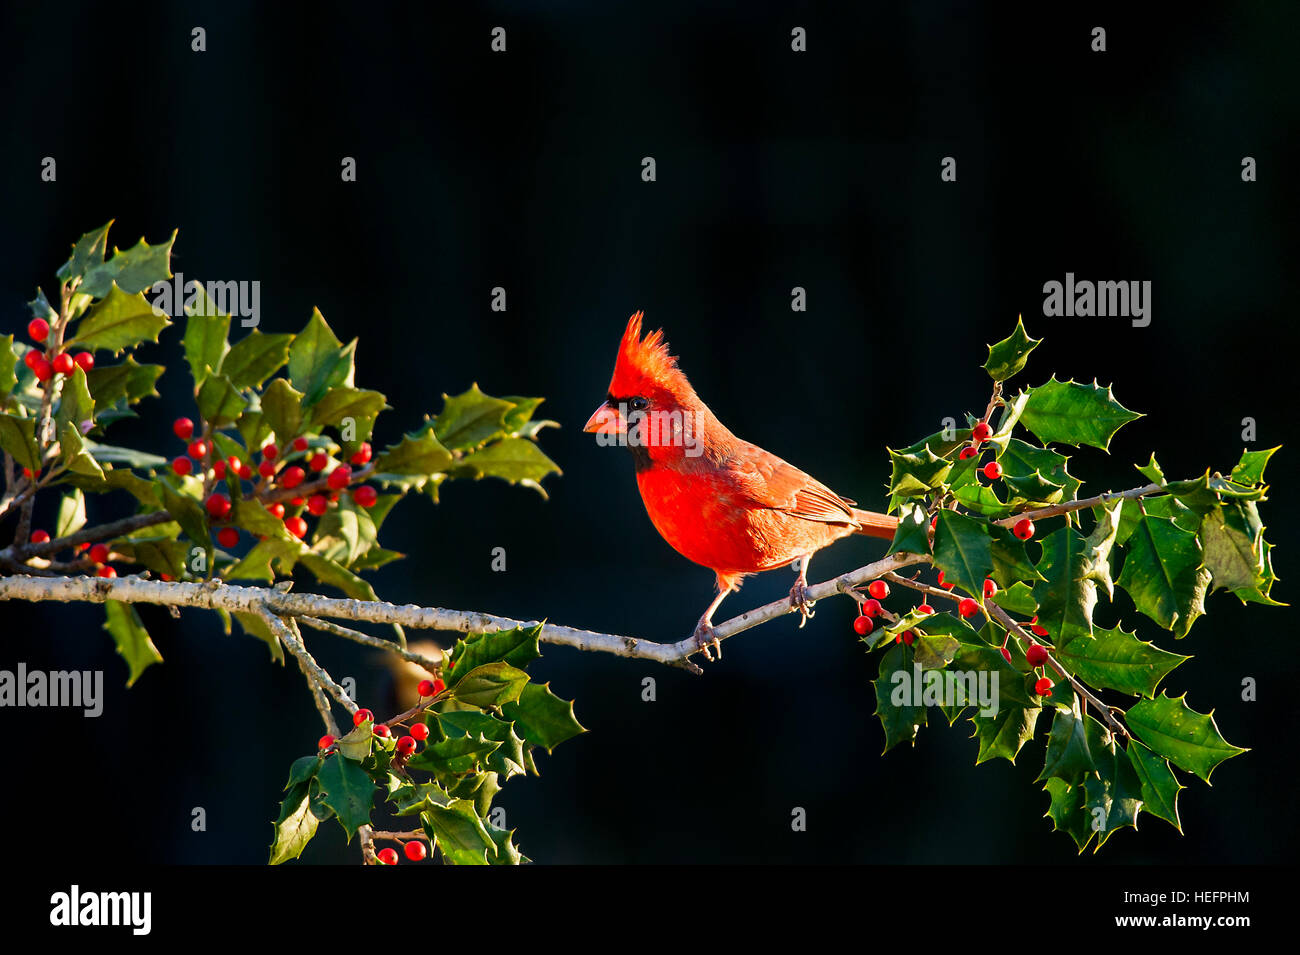 A bright red male Northern Cardinal perched on a branch of holly with red berries. Stock Photo